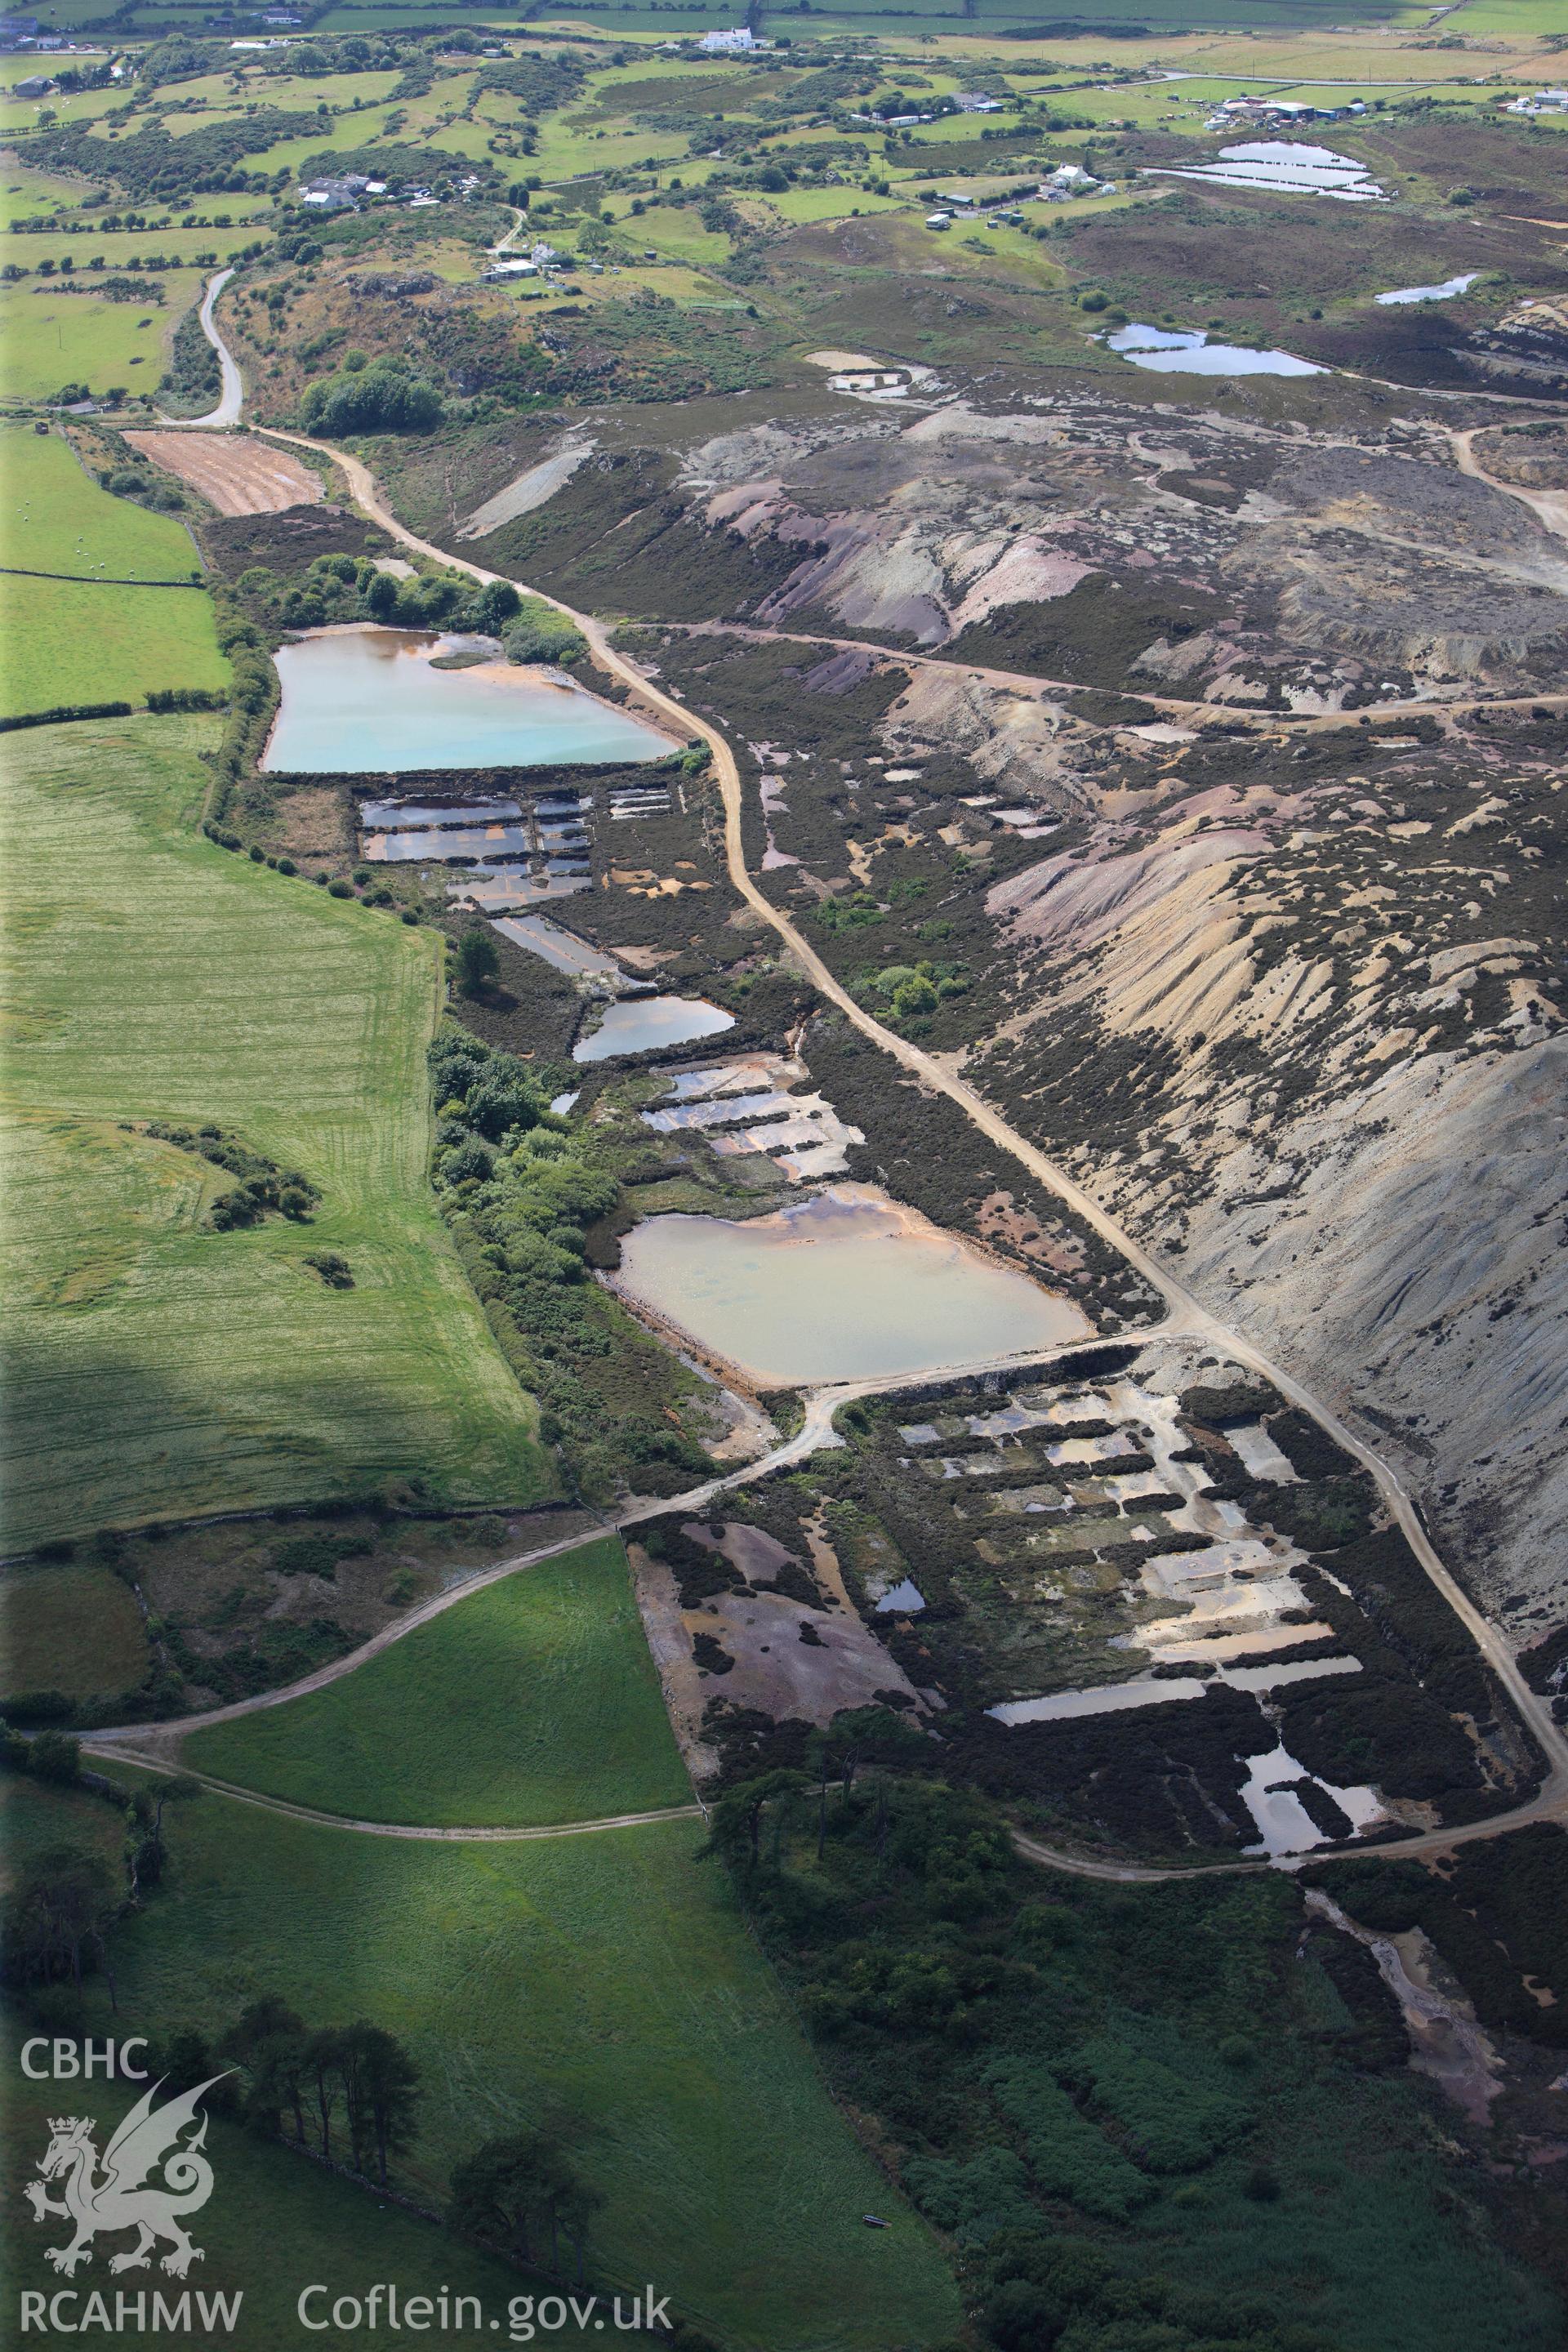 RCAHMW colour oblique photograph of Parys Mountain Copper Mines, Amlwch, ponds on south side. Taken by Toby Driver on 20/07/2011.